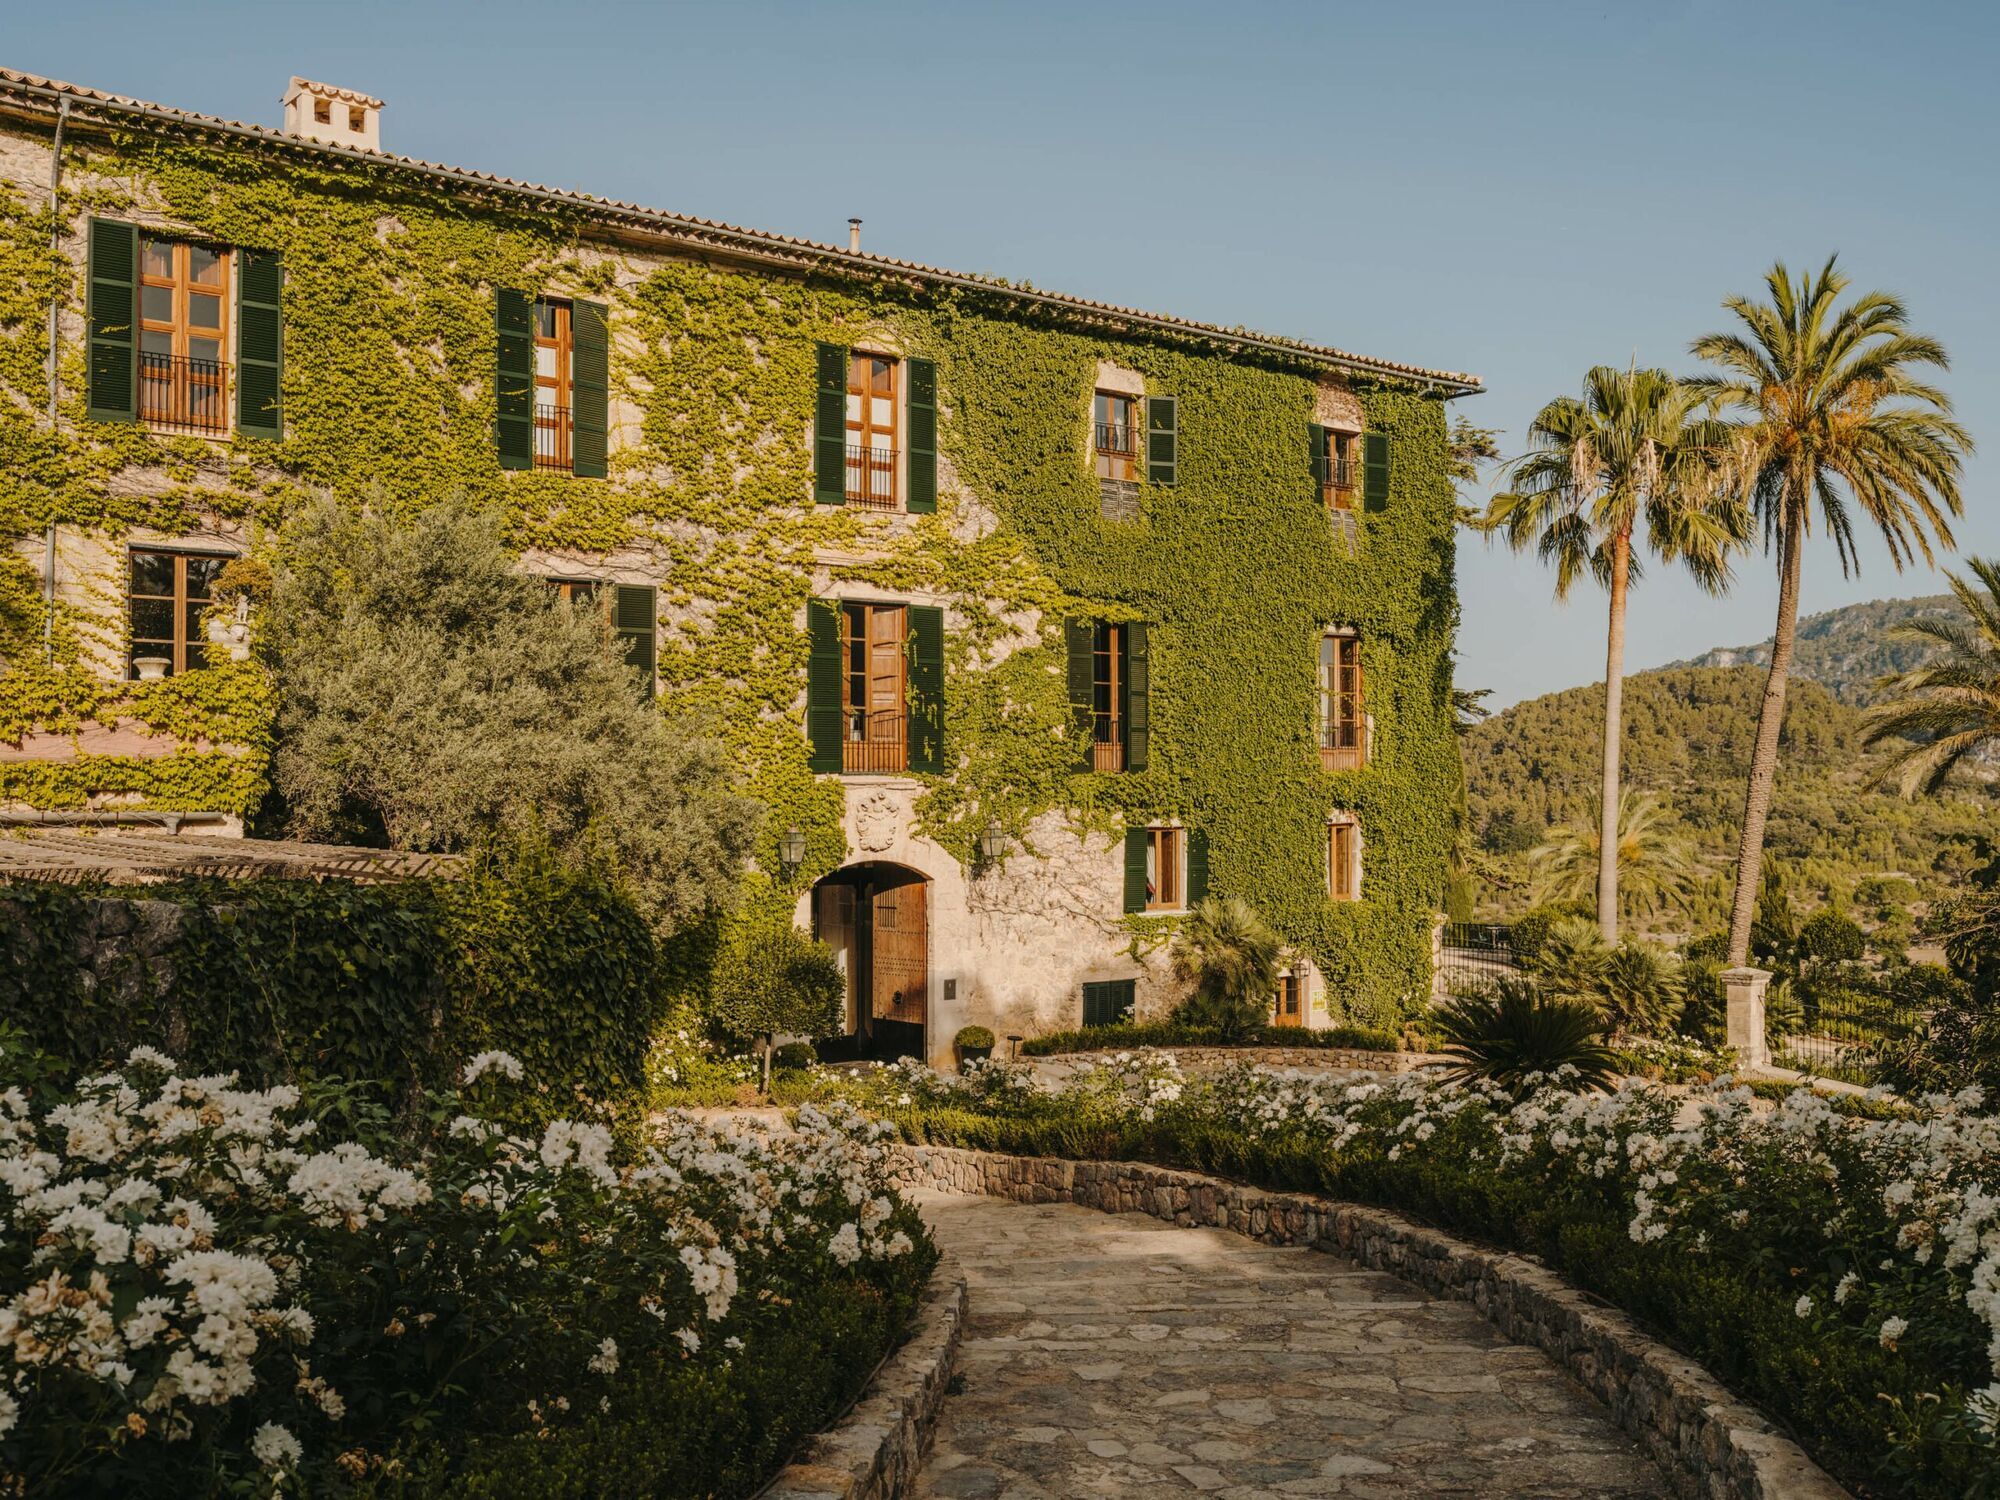 Family hotels in Mallorca: top 10 first-class places in the Balearic Islands